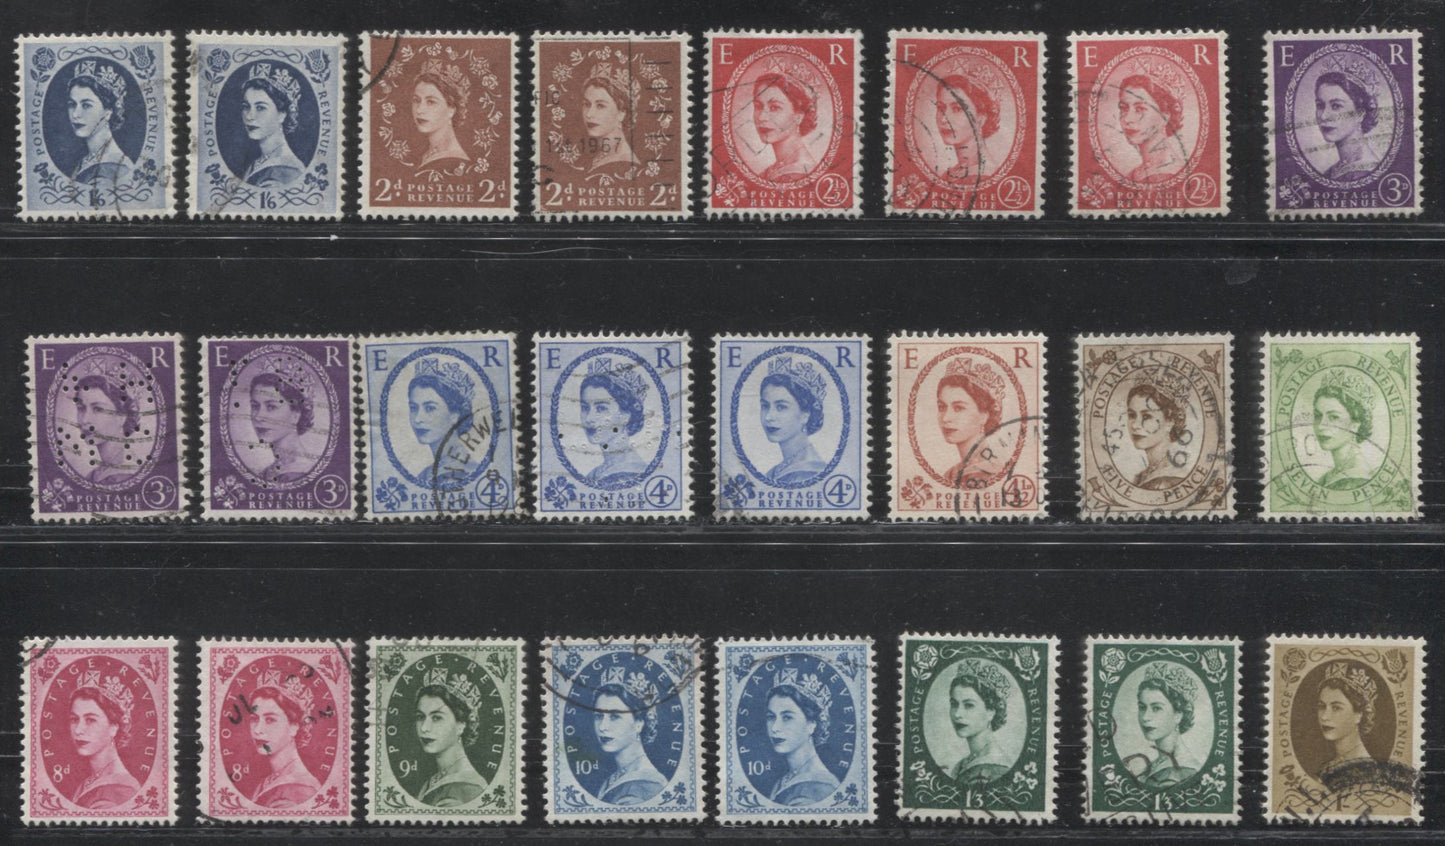 Great Britain SC#353-369 SG#570-586 1/2d Orange - 1/6d Grey Blue Queen Elizabeth II, 1958-1967 Wilding Issue, Multiple Crown Watermark, Complete & Partial Sets, Fluorescent & Non Fluorescent White Papers, Many Varieties, Fine to Very Fine Used